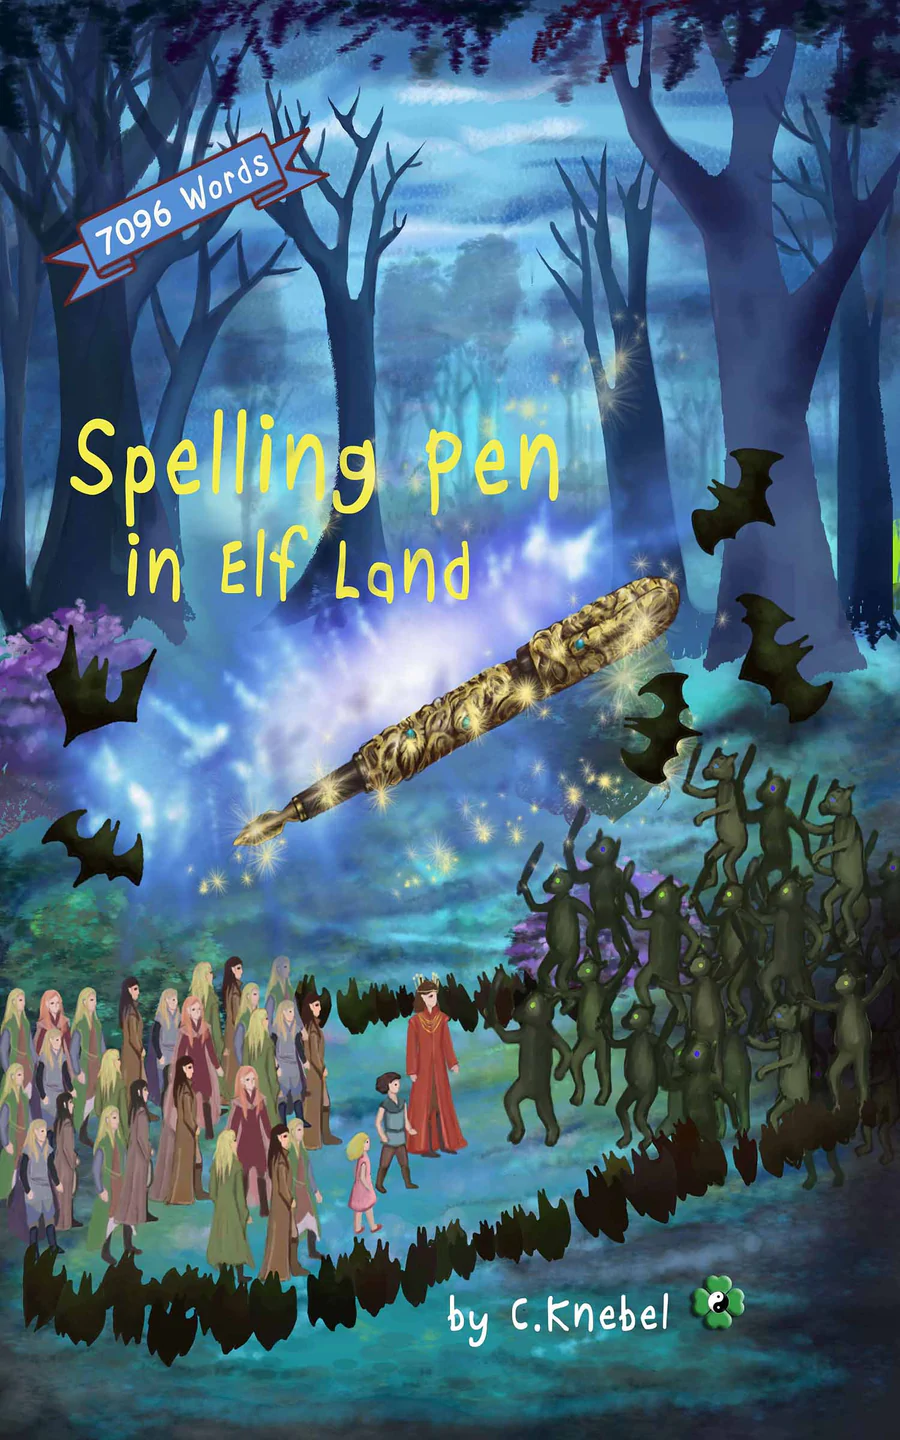 Large Spelling pen floating on top a group of ELF